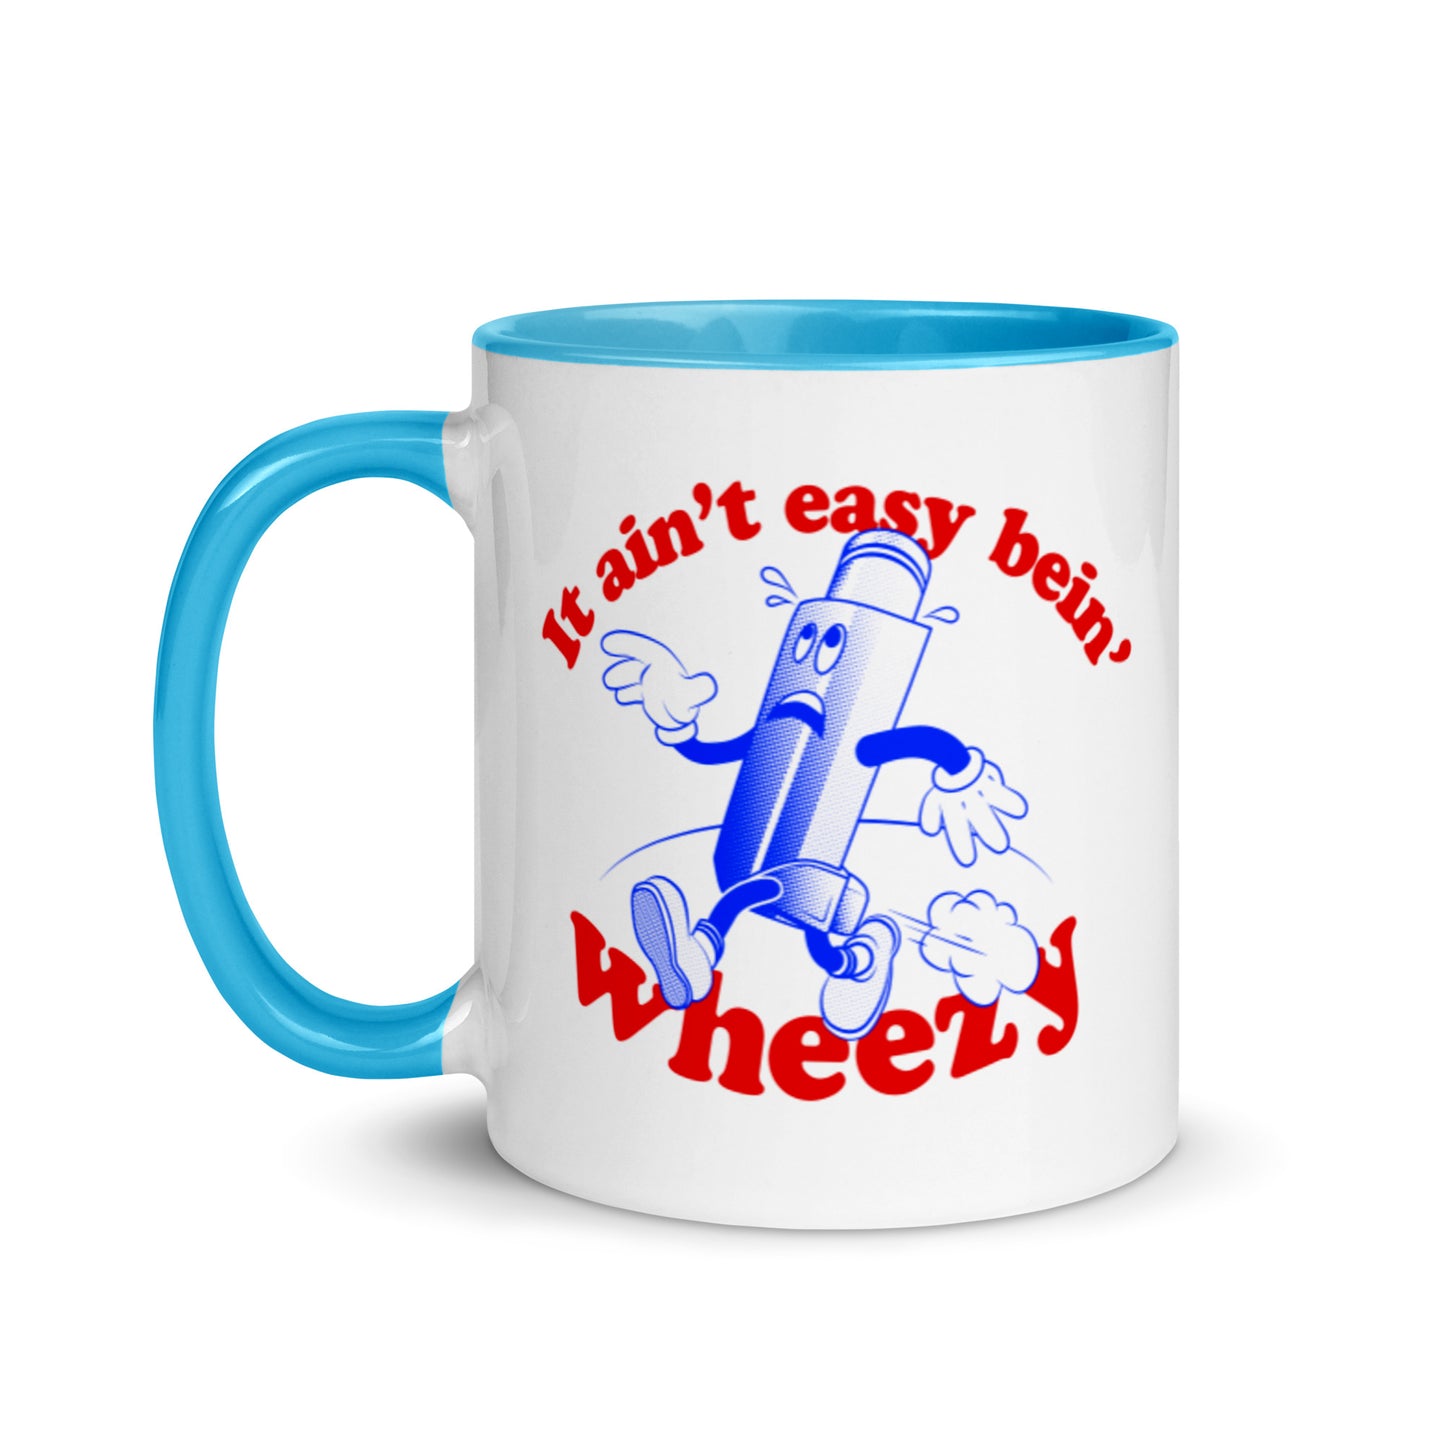 It ain't easy bein' wheezy - Mug with Color Inside